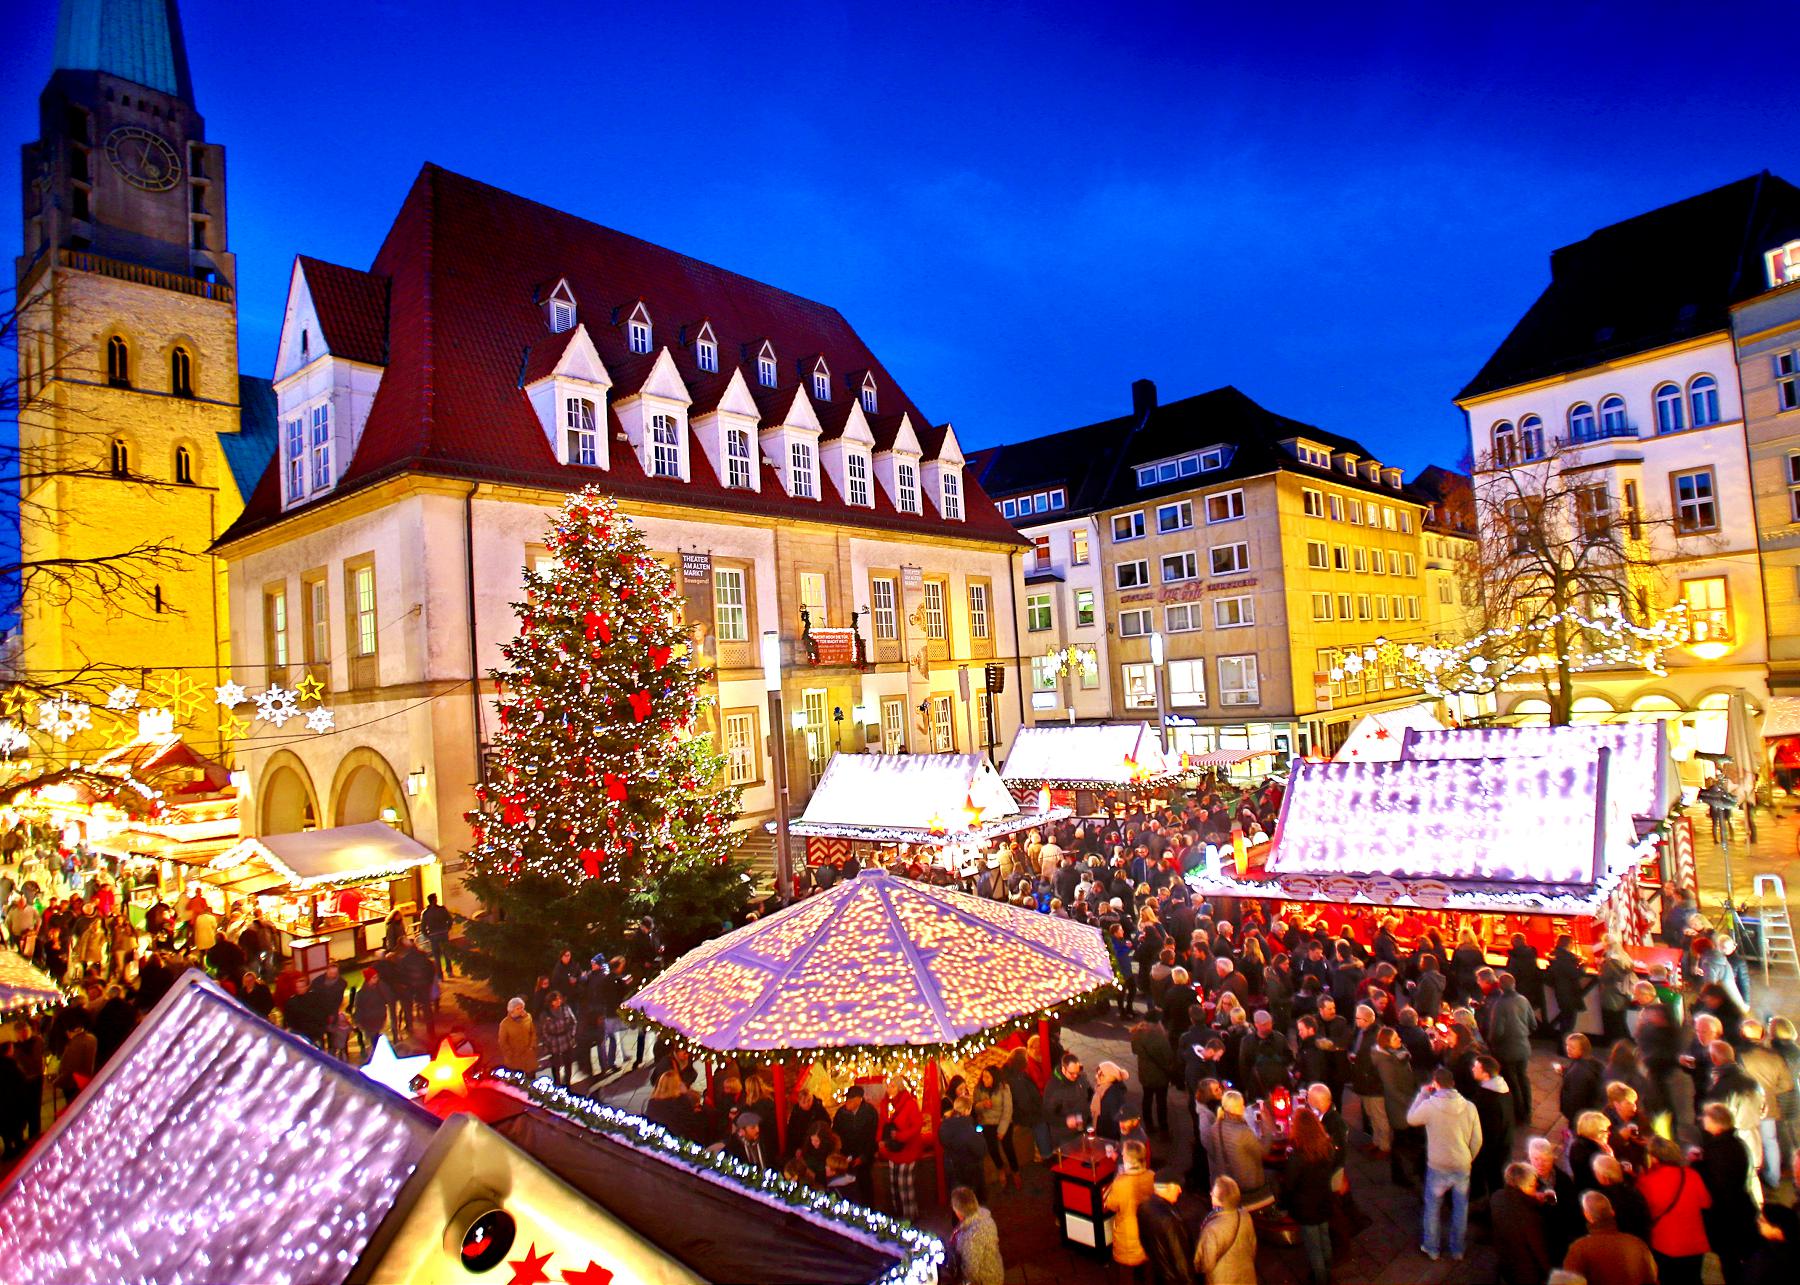 Christmas market with many stands